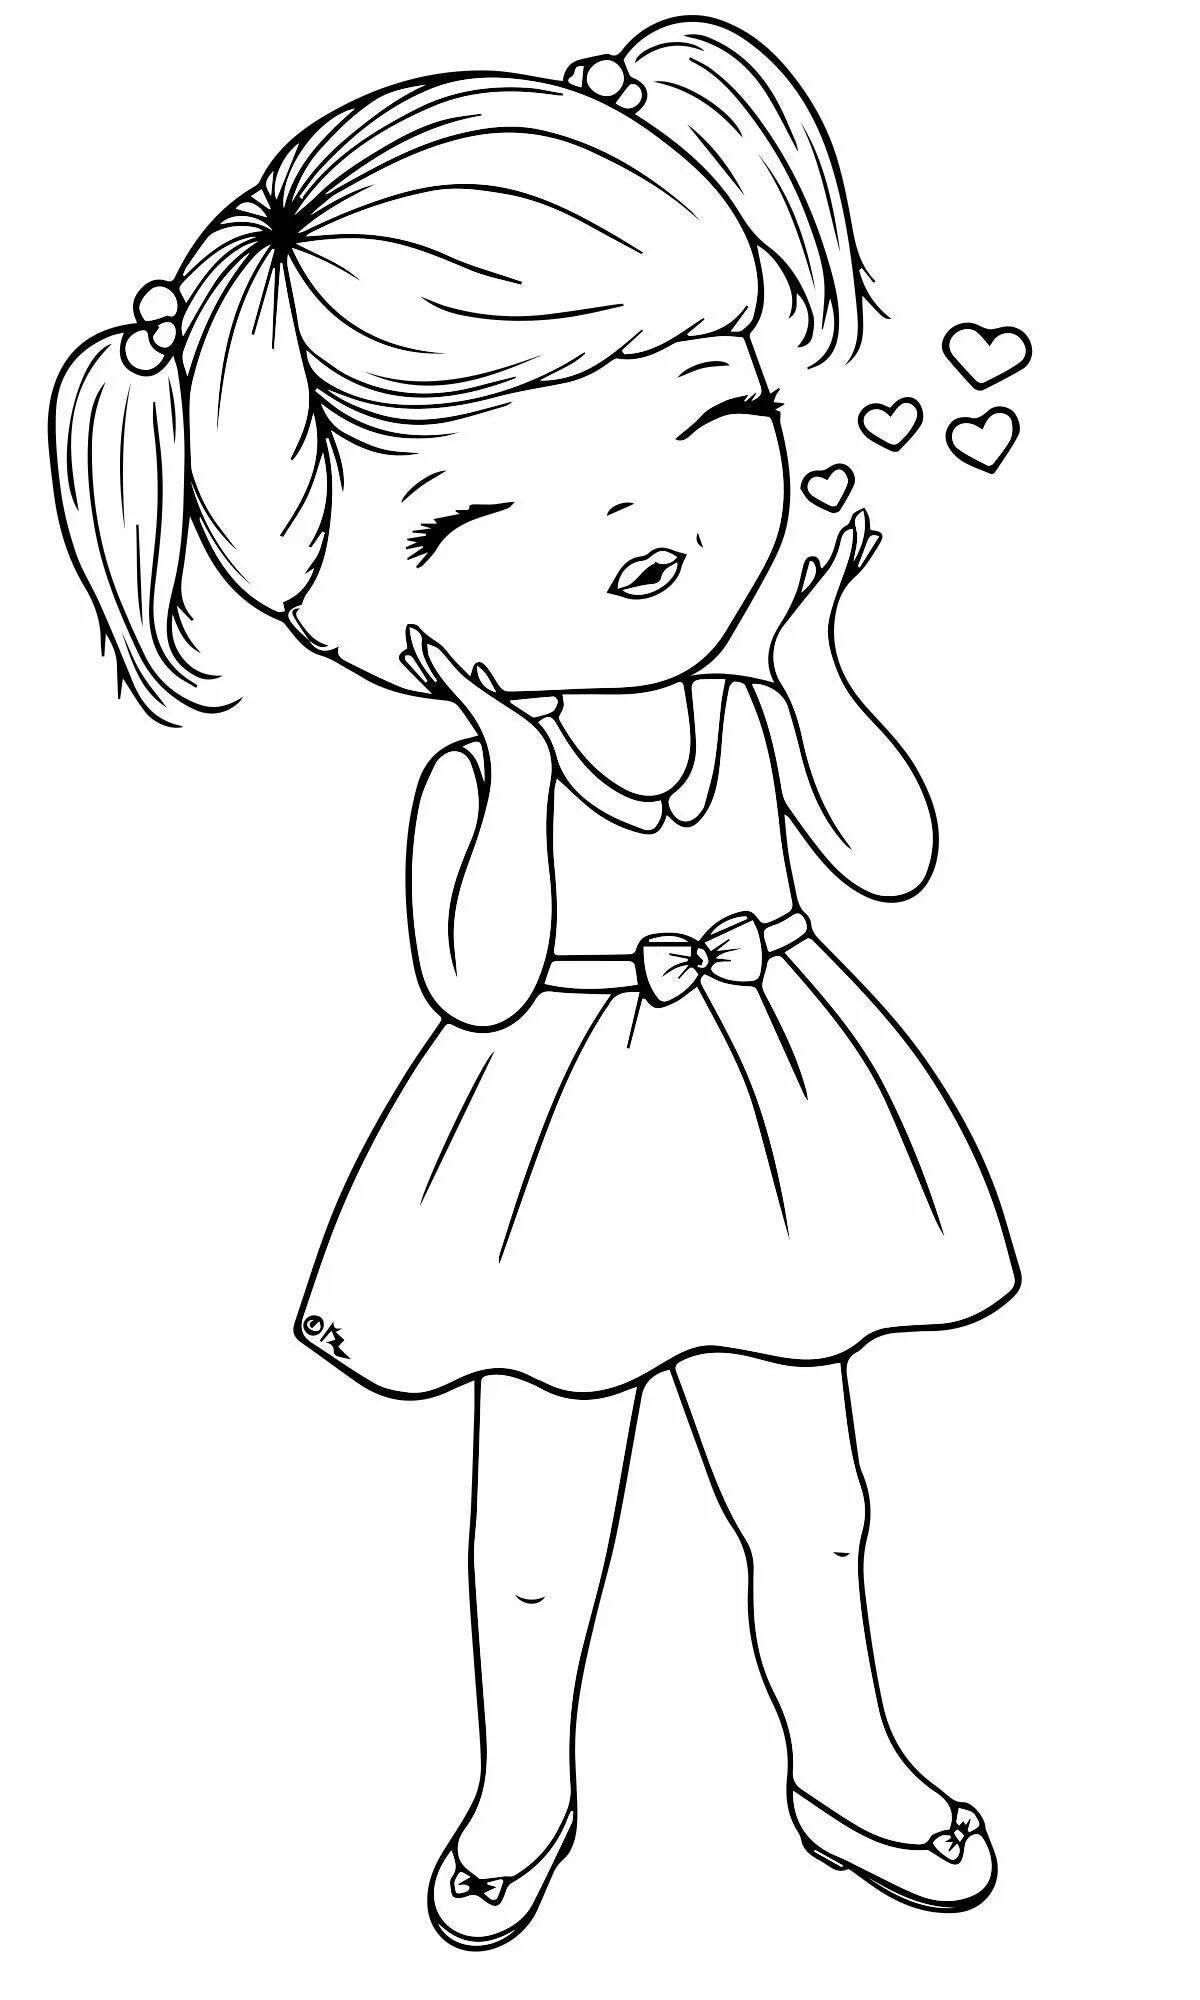 Fun black and white coloring book for girls